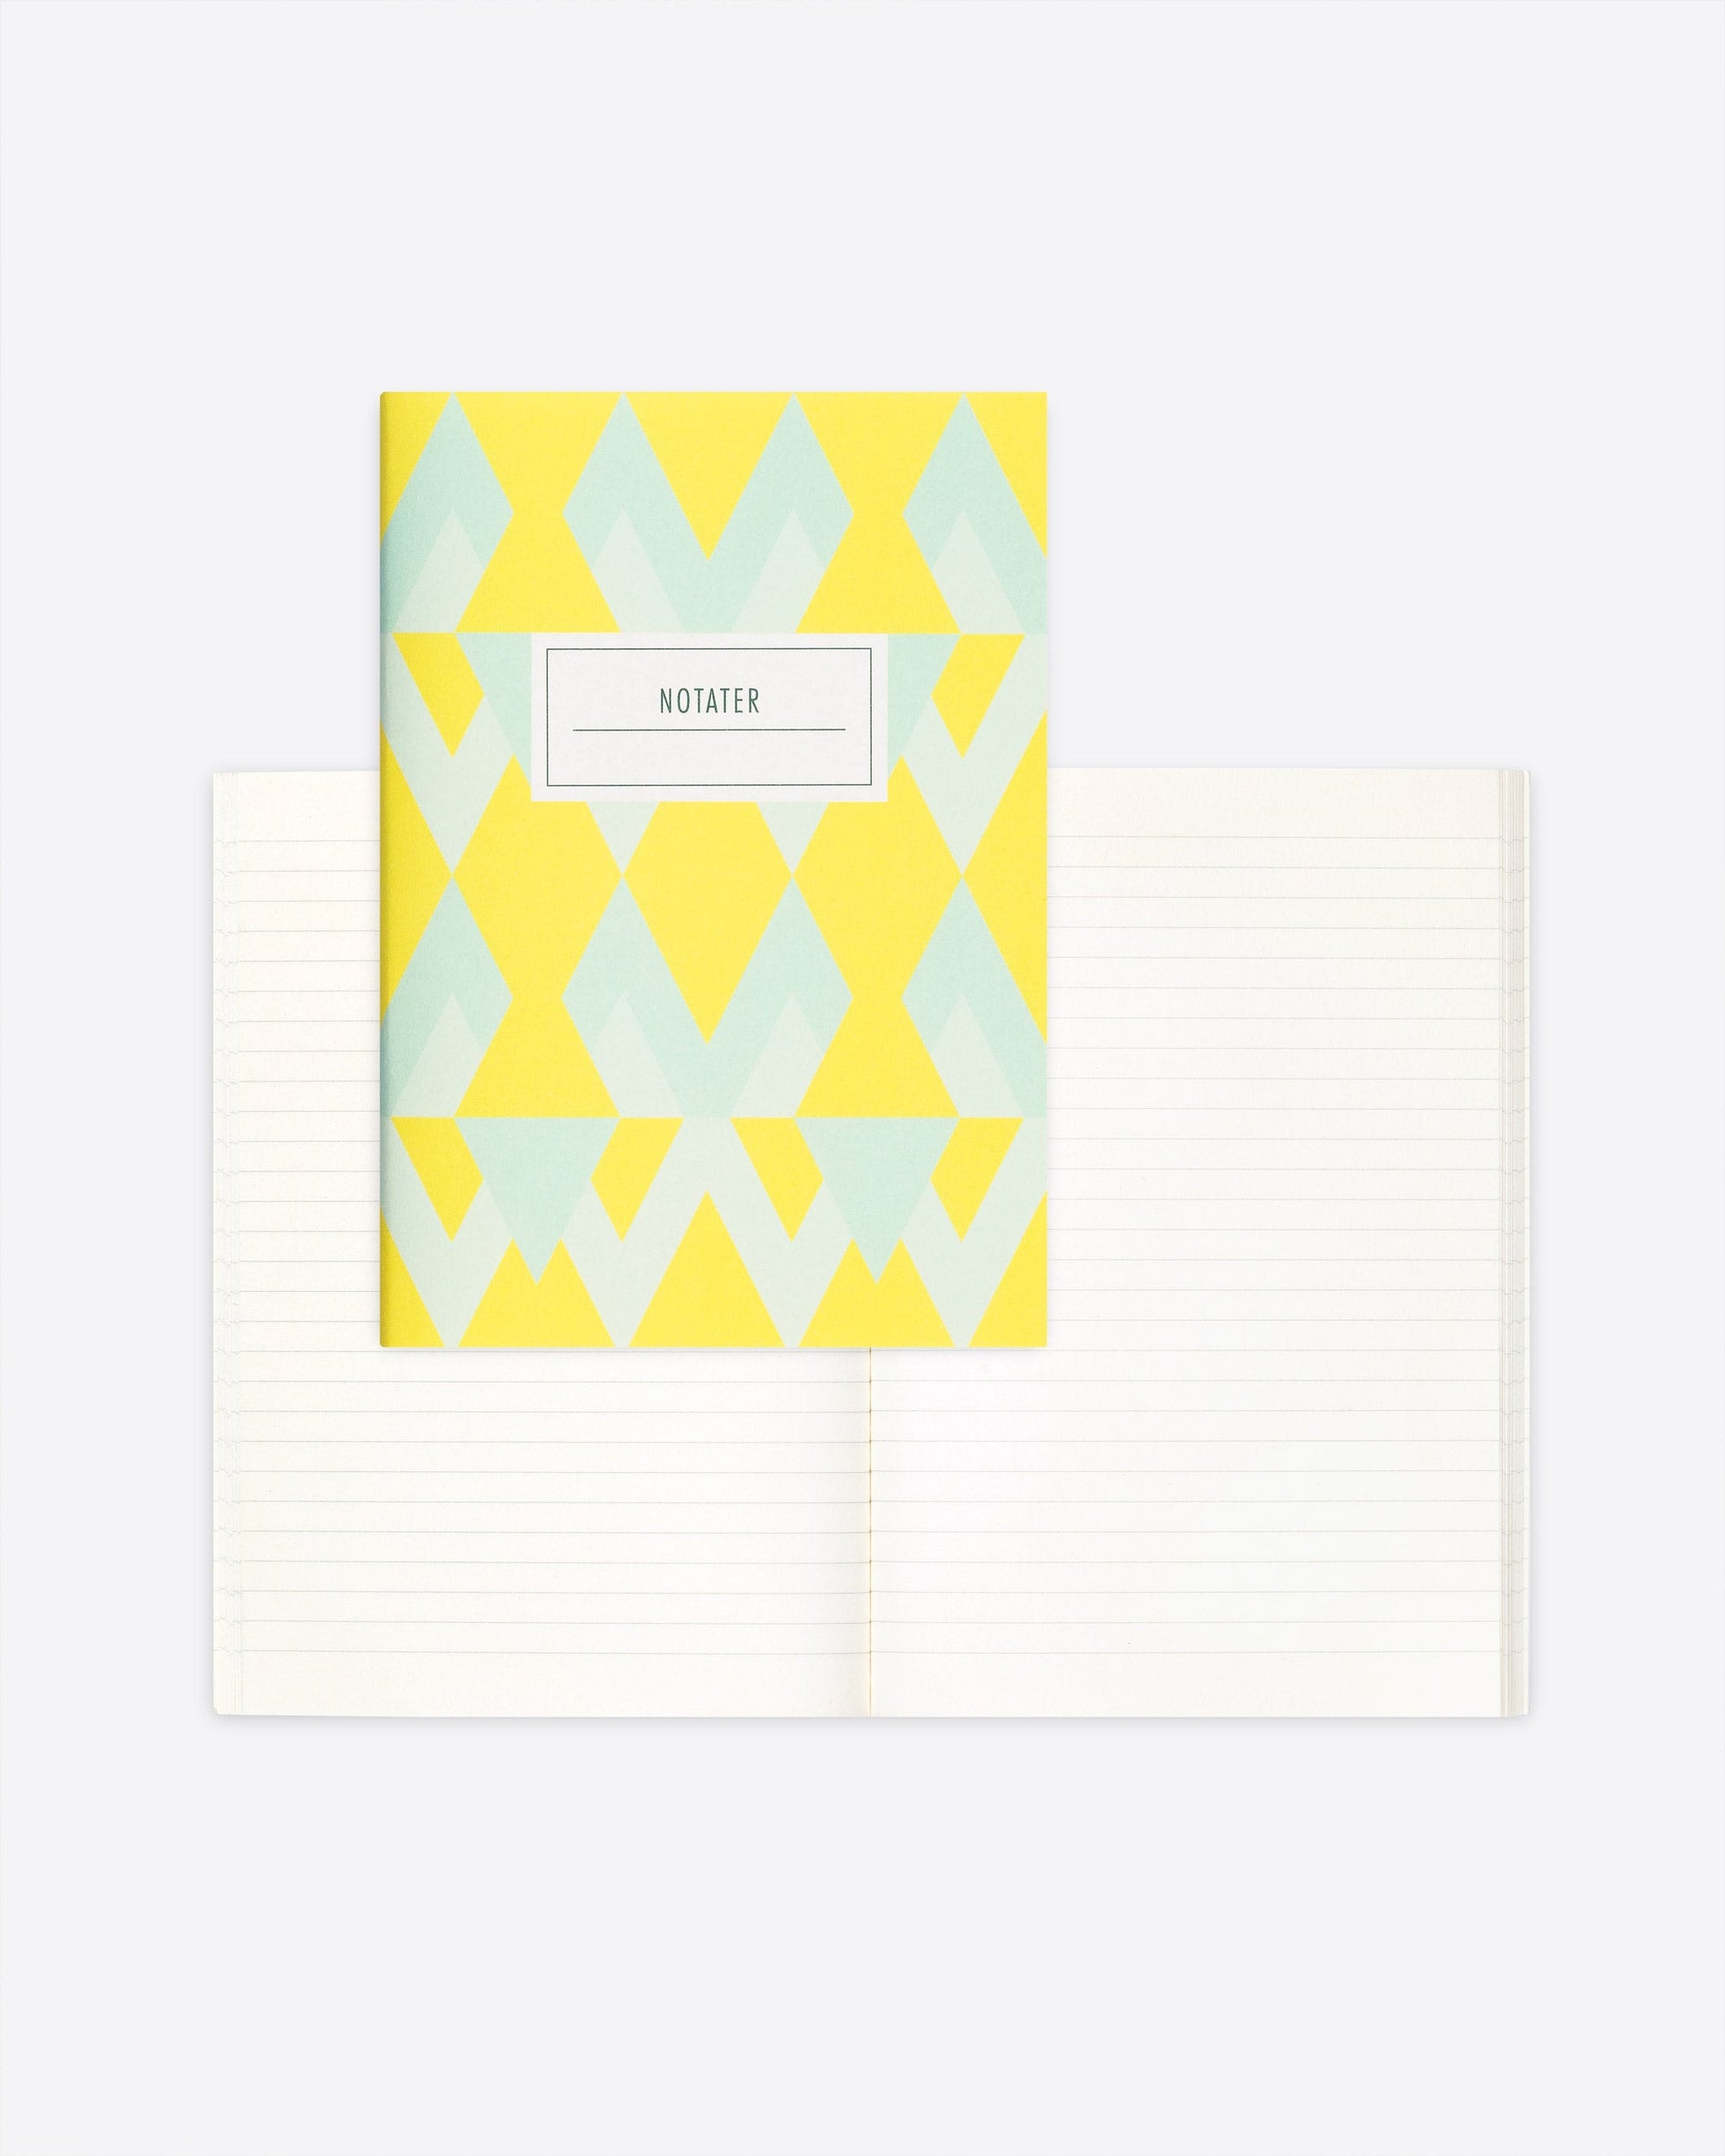 Pocket sized notebook with dust jacket